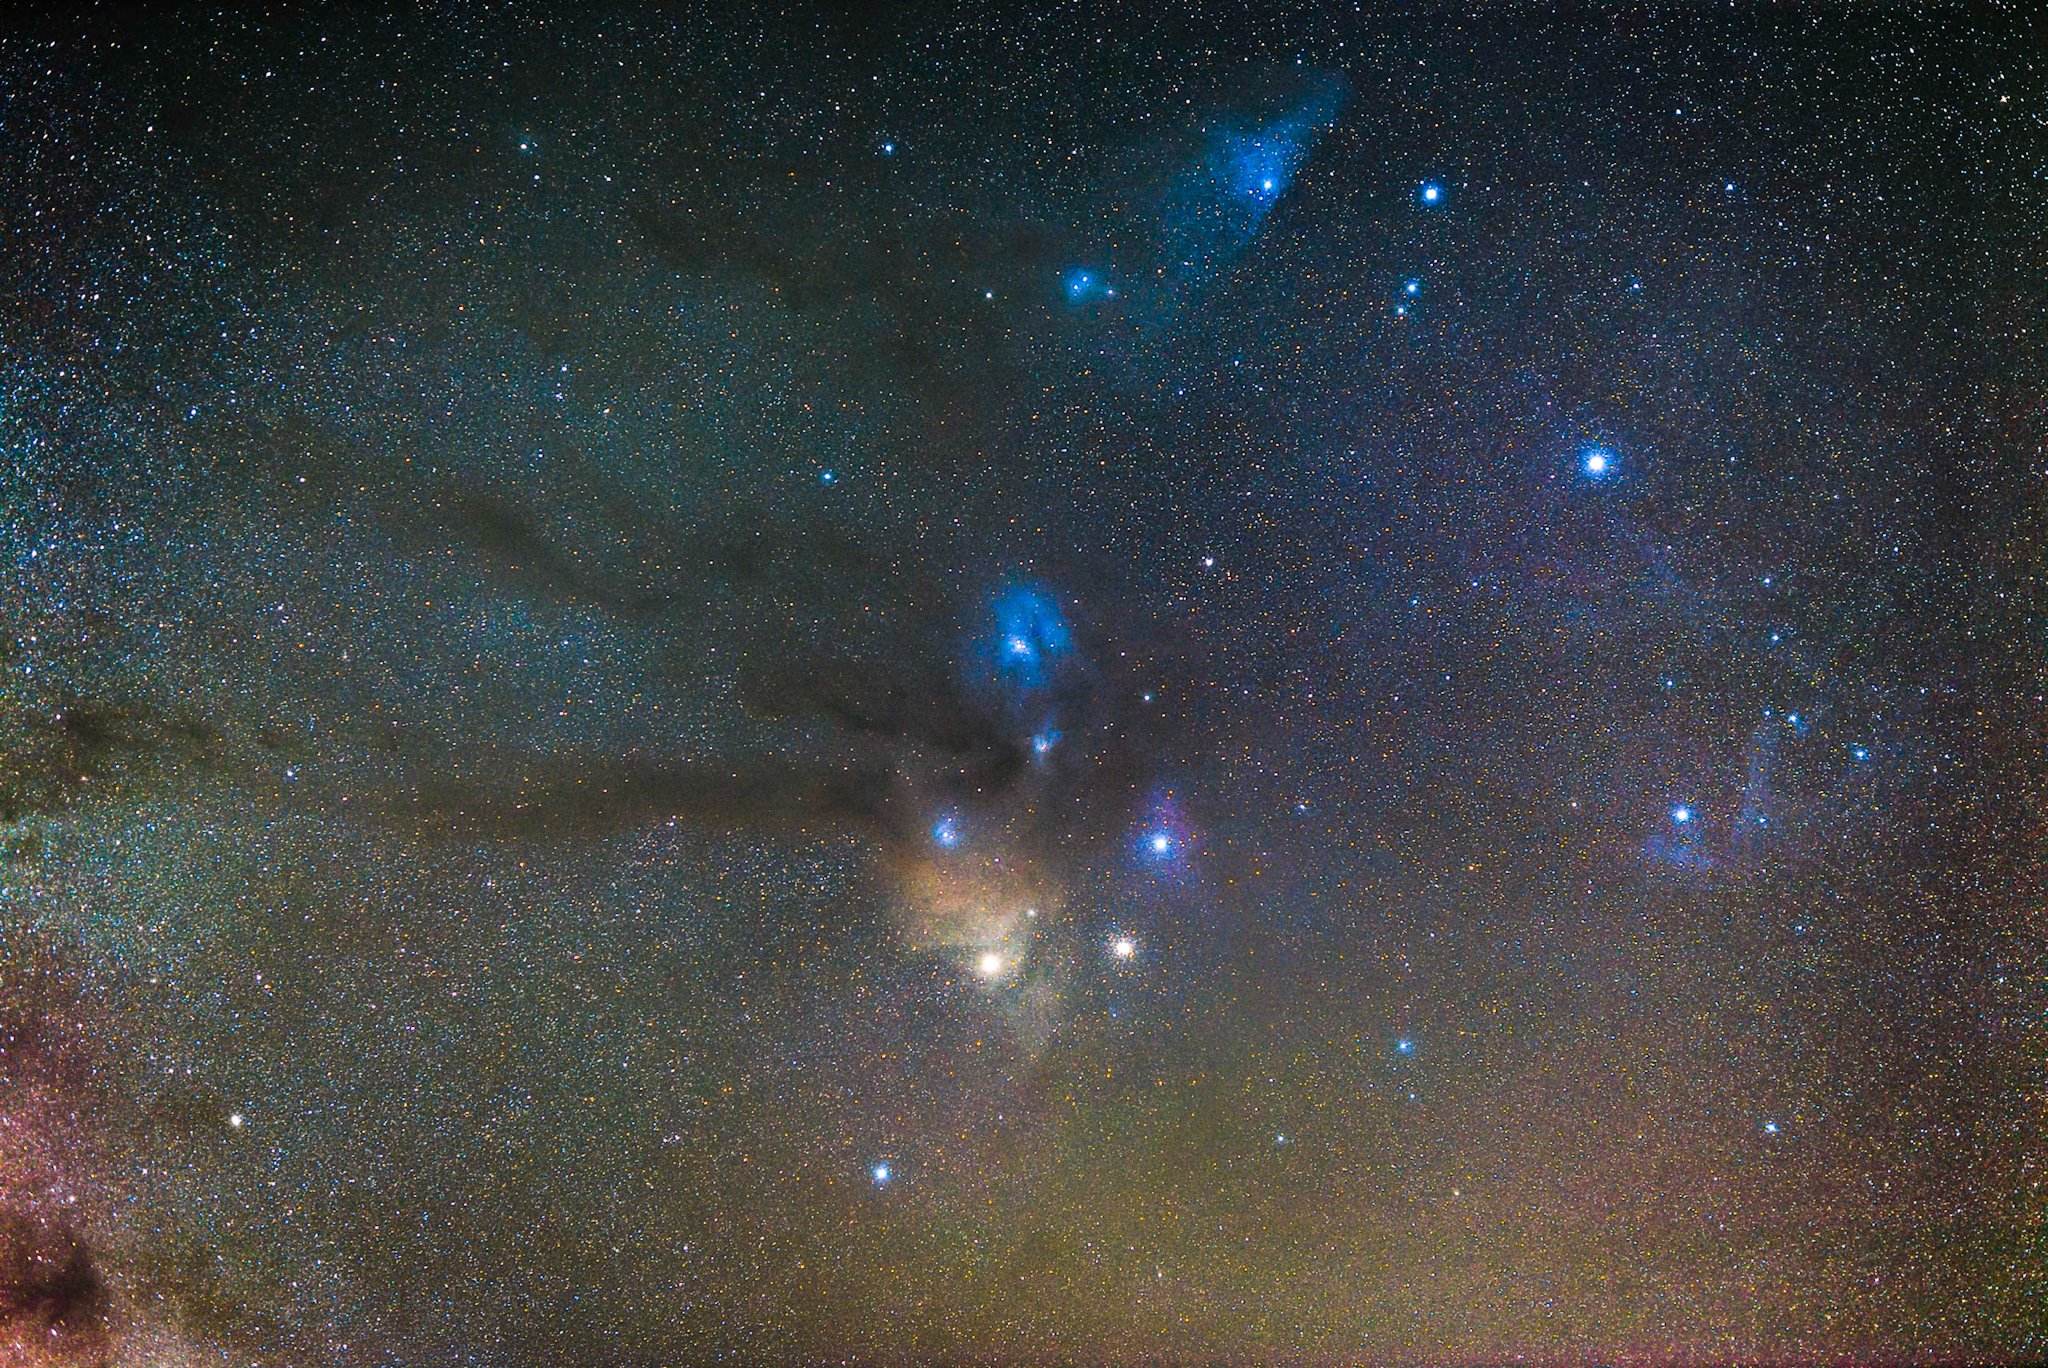 Rho Ophiuchi and Antares shot on the Sigma 105mm f/1.4 DG HSM Art Lens